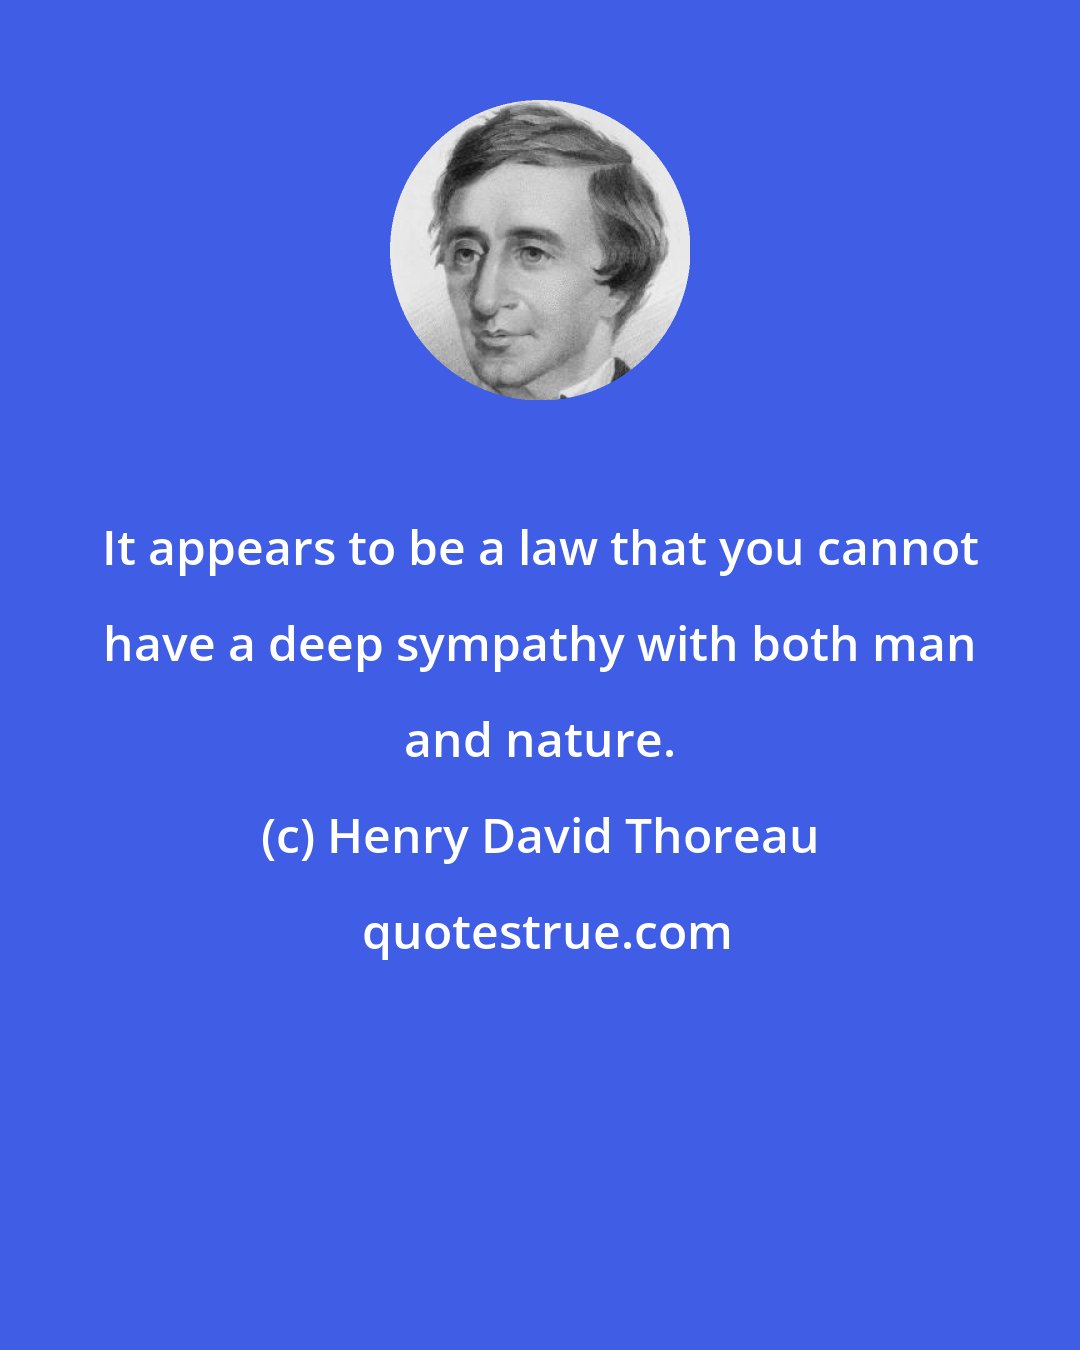 Henry David Thoreau: It appears to be a law that you cannot have a deep sympathy with both man and nature.